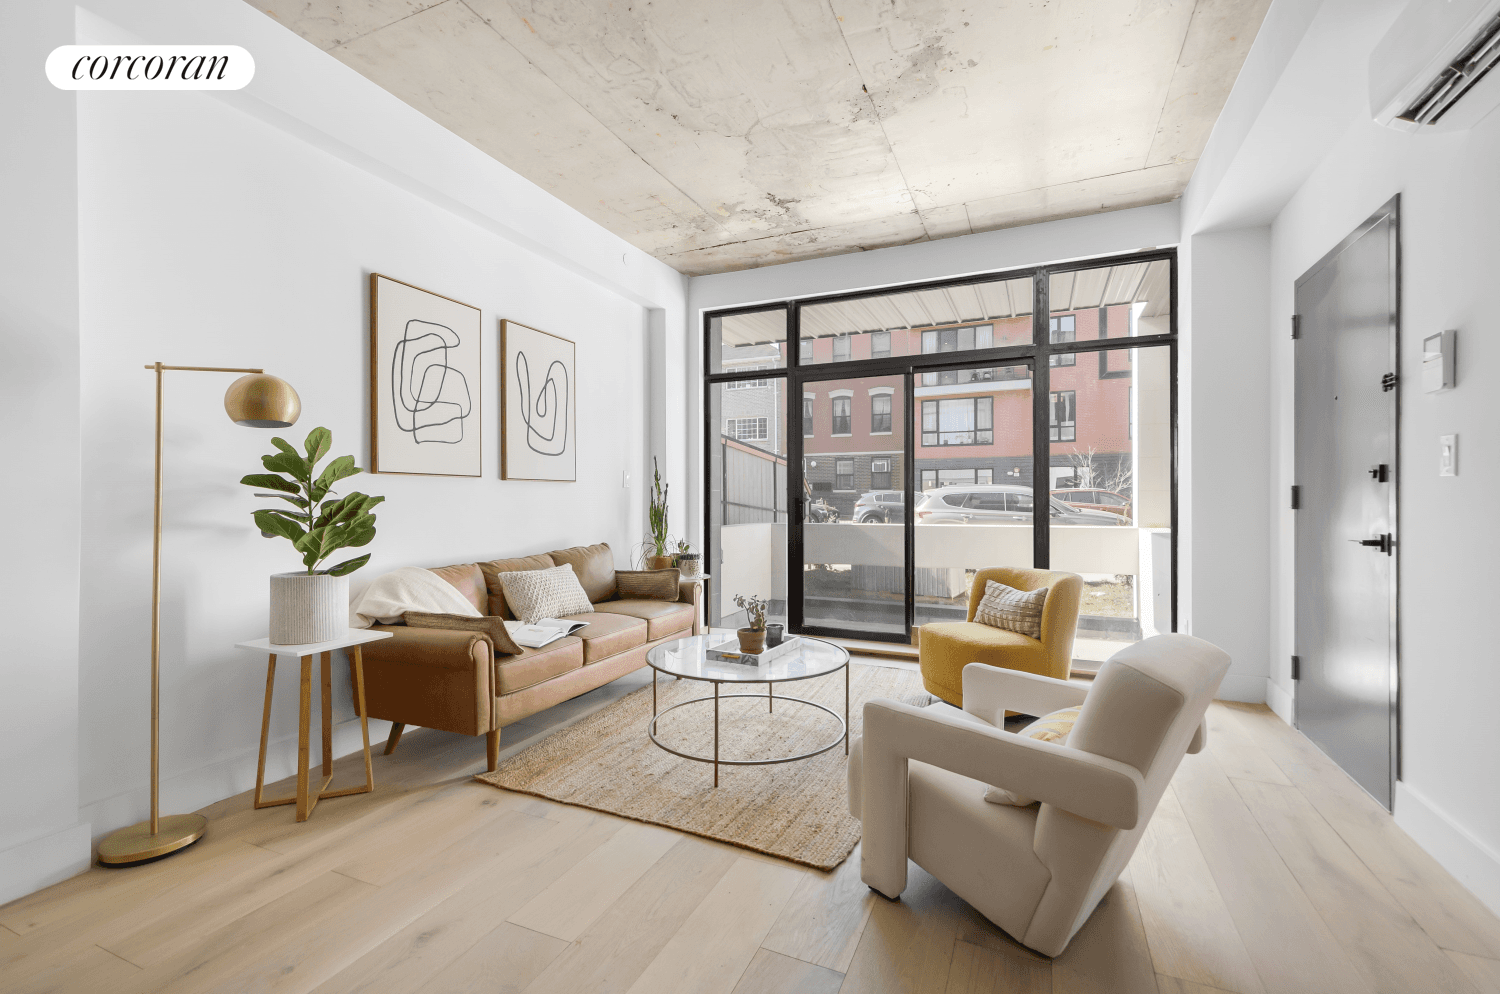 531 Classon Avenue is a new, 8 unit boutique new construction condo building offering the best of both worlds modern finishes and industrial vibes in a loft like setting.